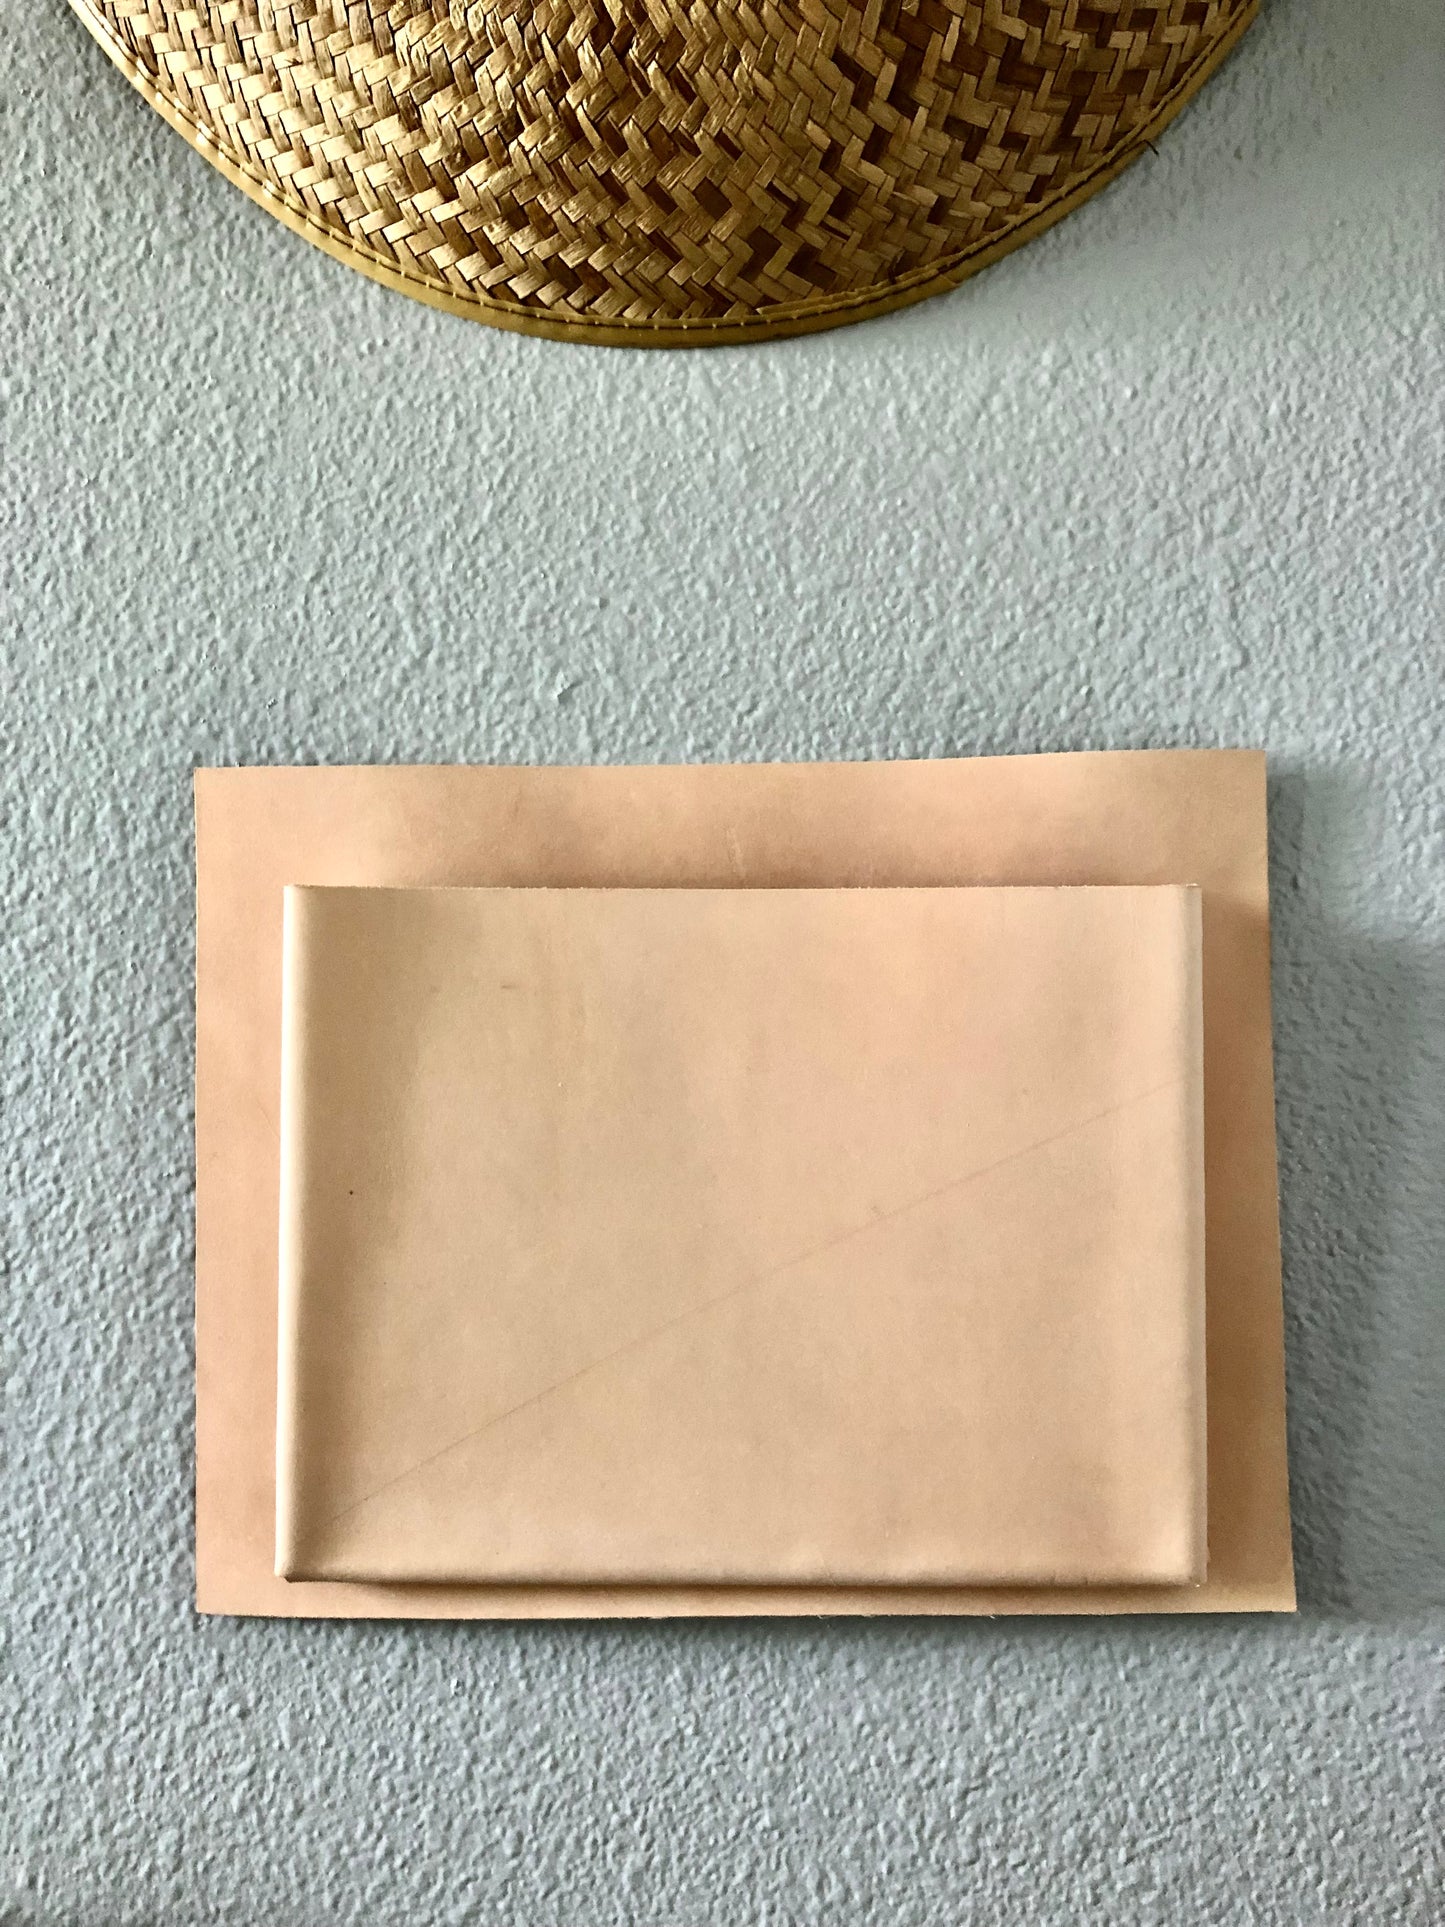 Handcrafted Nude Leather Wall Pocket | Hanging Storage | Leather Magazine Holder | Mail Organizer